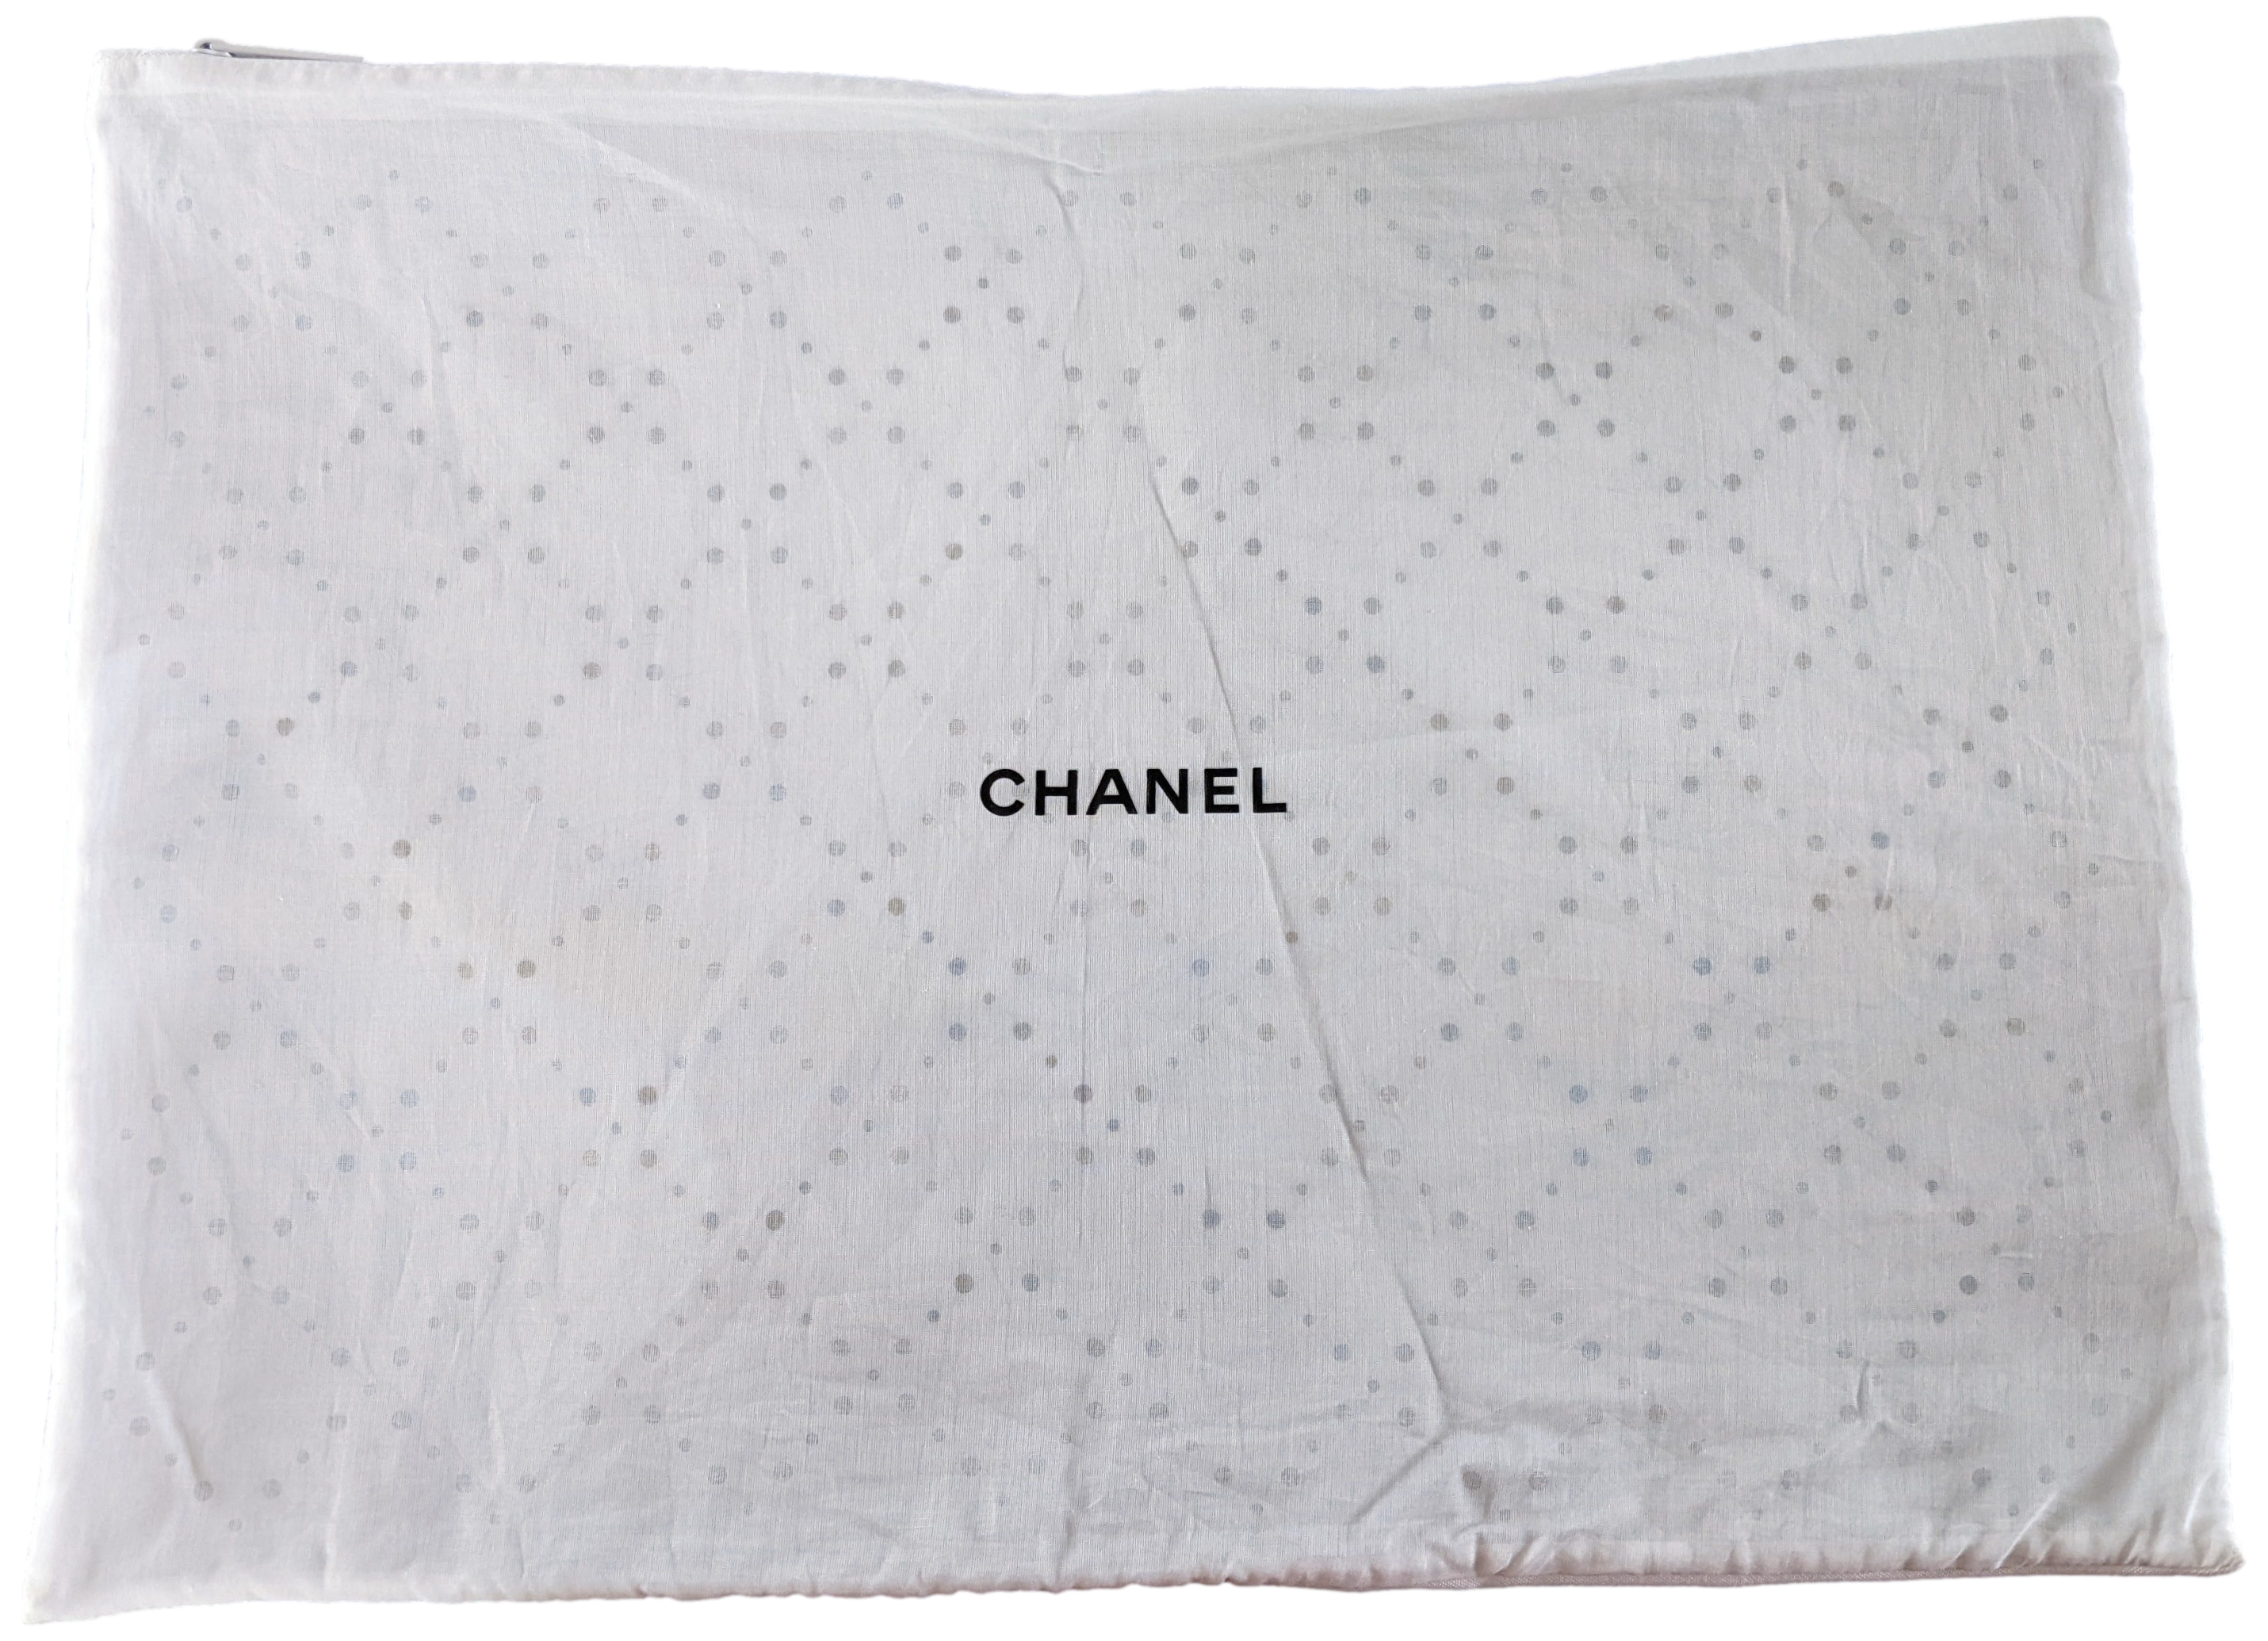 CHANEL, Bags, Large Authentic Chanel Big Dust Bag